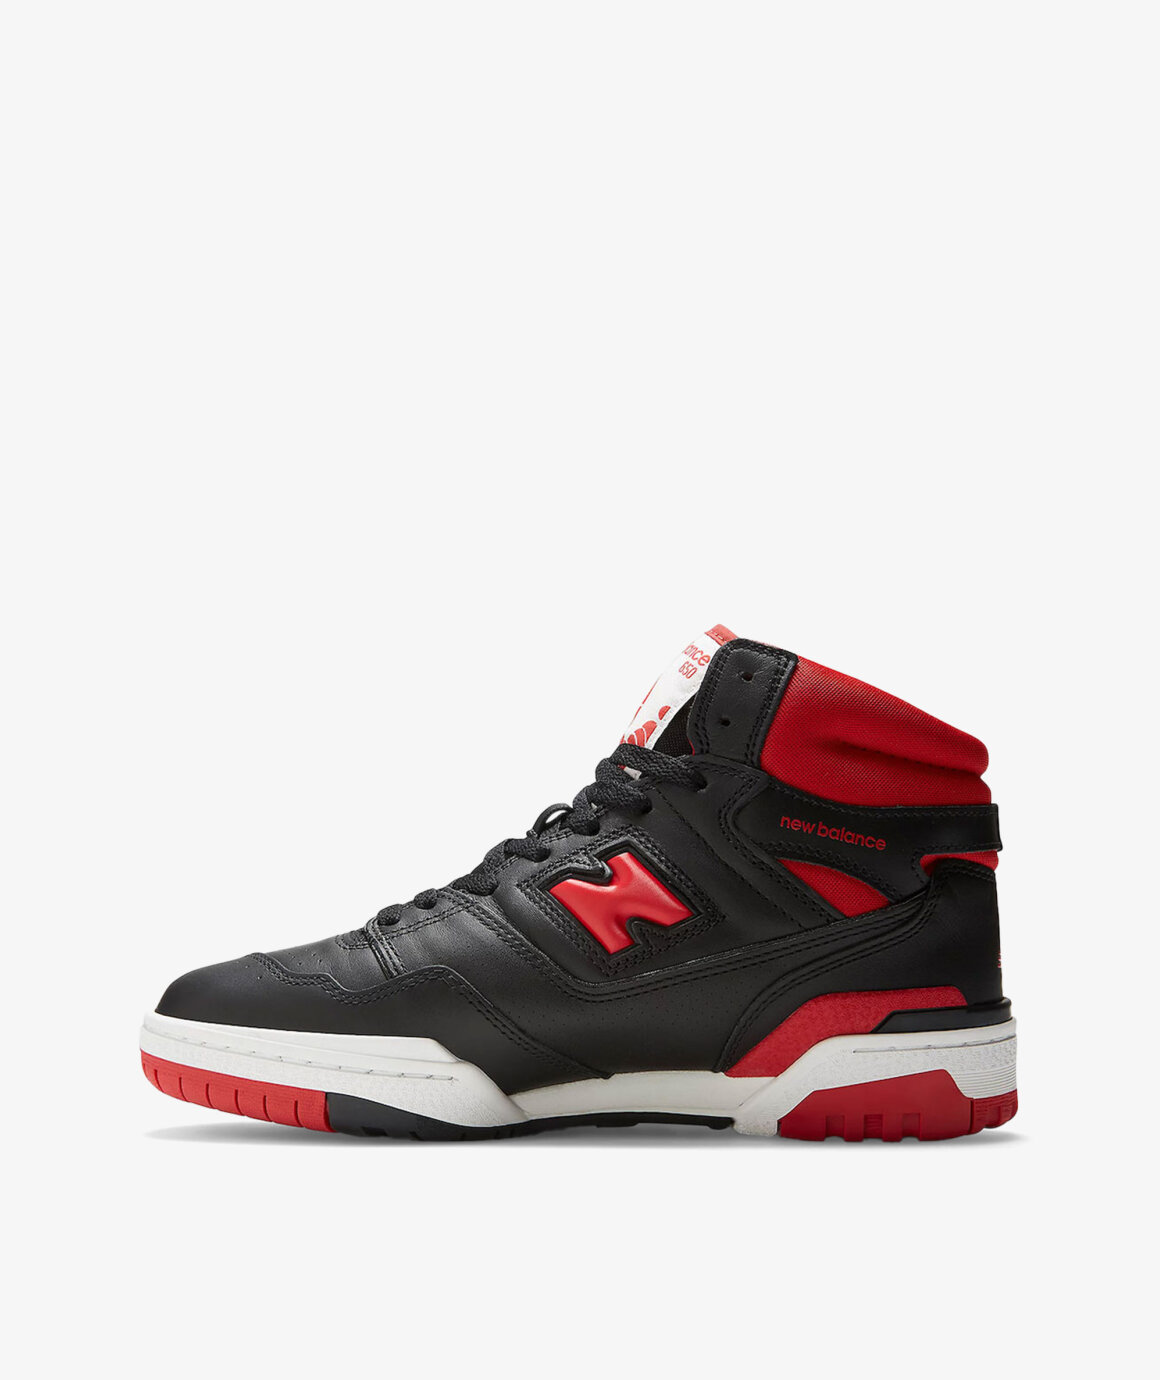 Norse Store | Shipping Worldwide - New Balance BB650RBR - Black / Red